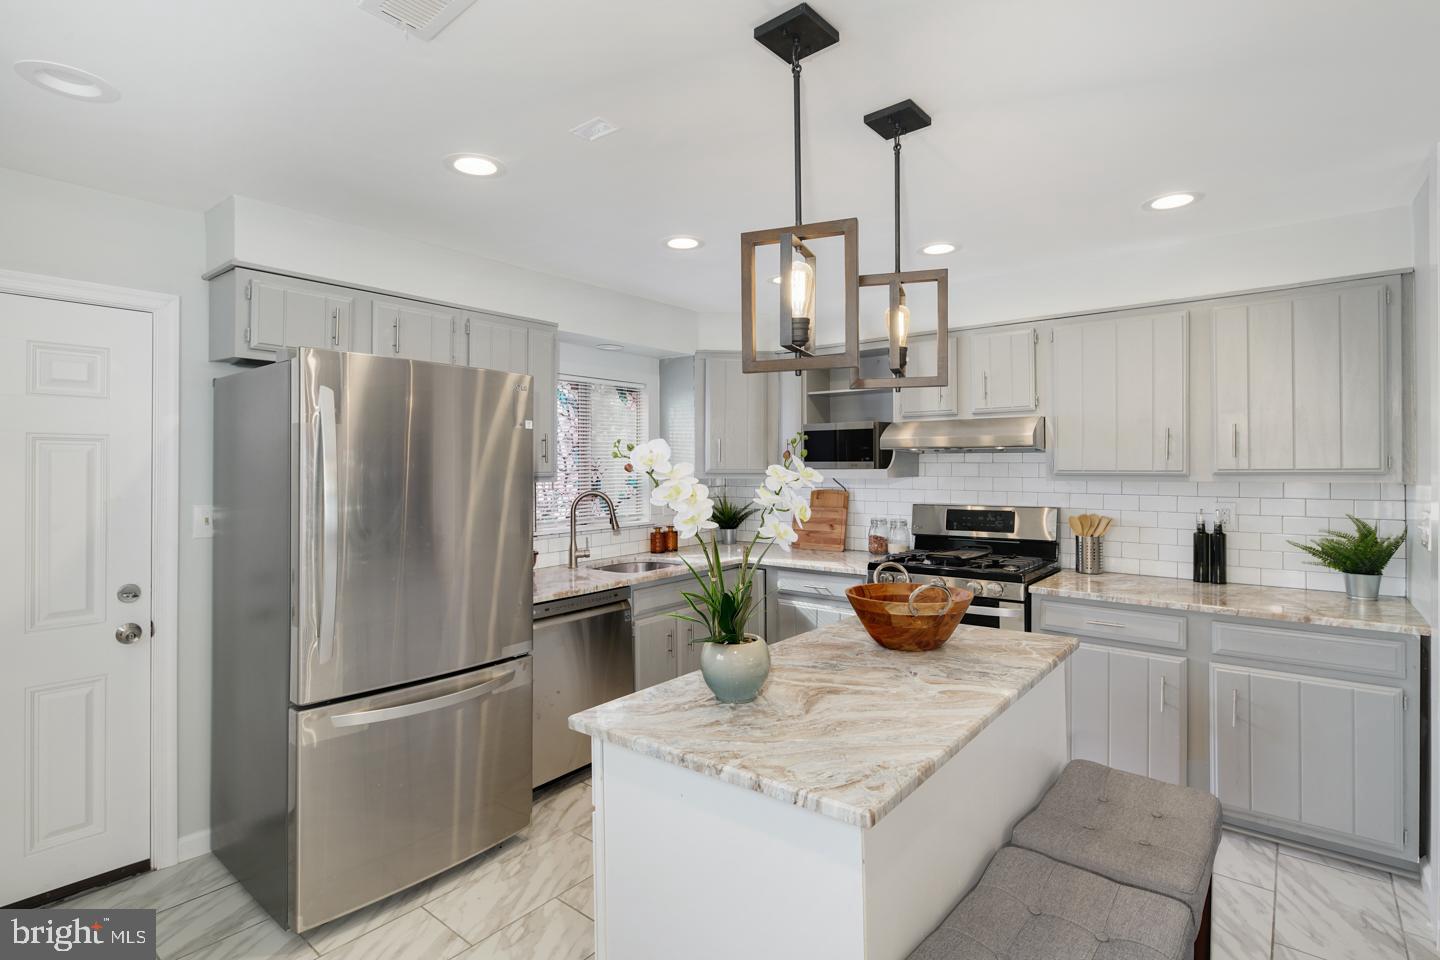 a kitchen with stainless steel appliances granite countertop a refrigerator a stove a sink dishwasher a refrigerator and white cabinets with wooden floor